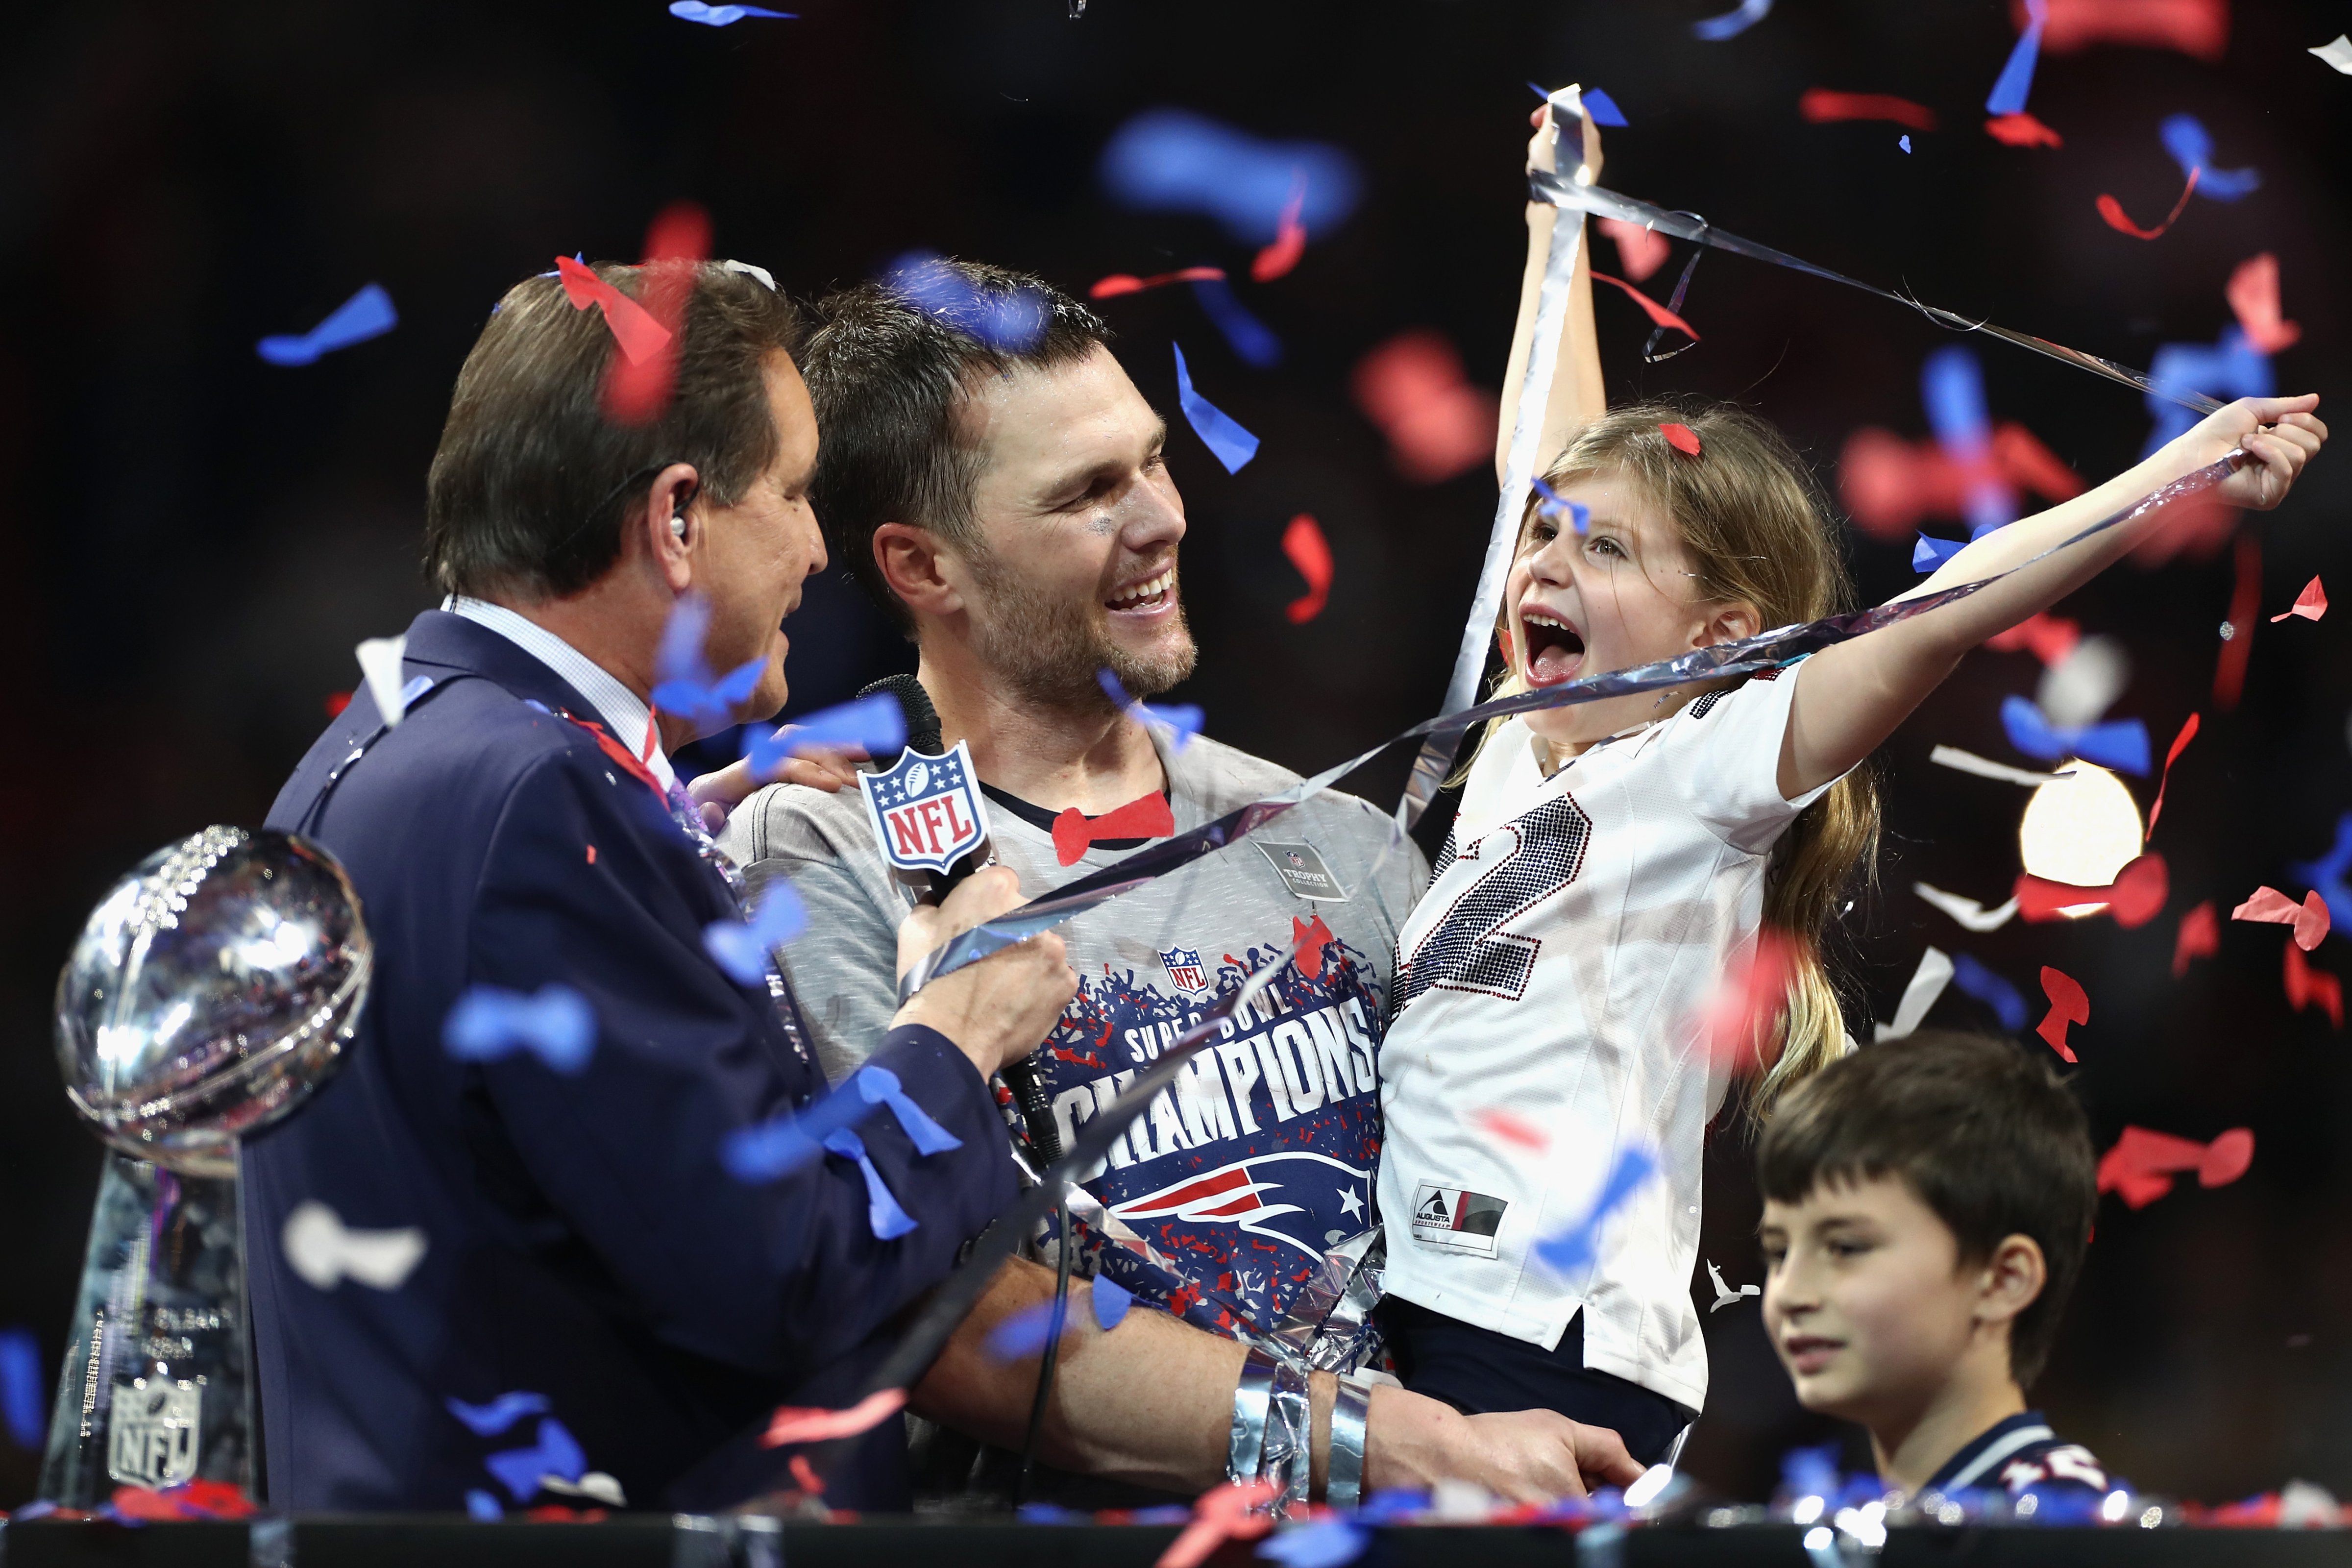 Vivian Lake Brady, daughter of Tom Brady #12, celebrates the Patriots' 13-3 win over the Los Angeles Rams during Super Bowl LIII at Mercedes-Benz Stadium on February 3, 2019 in Atlanta, Georgia. (Jamie Squire&mdash;Getty Images)